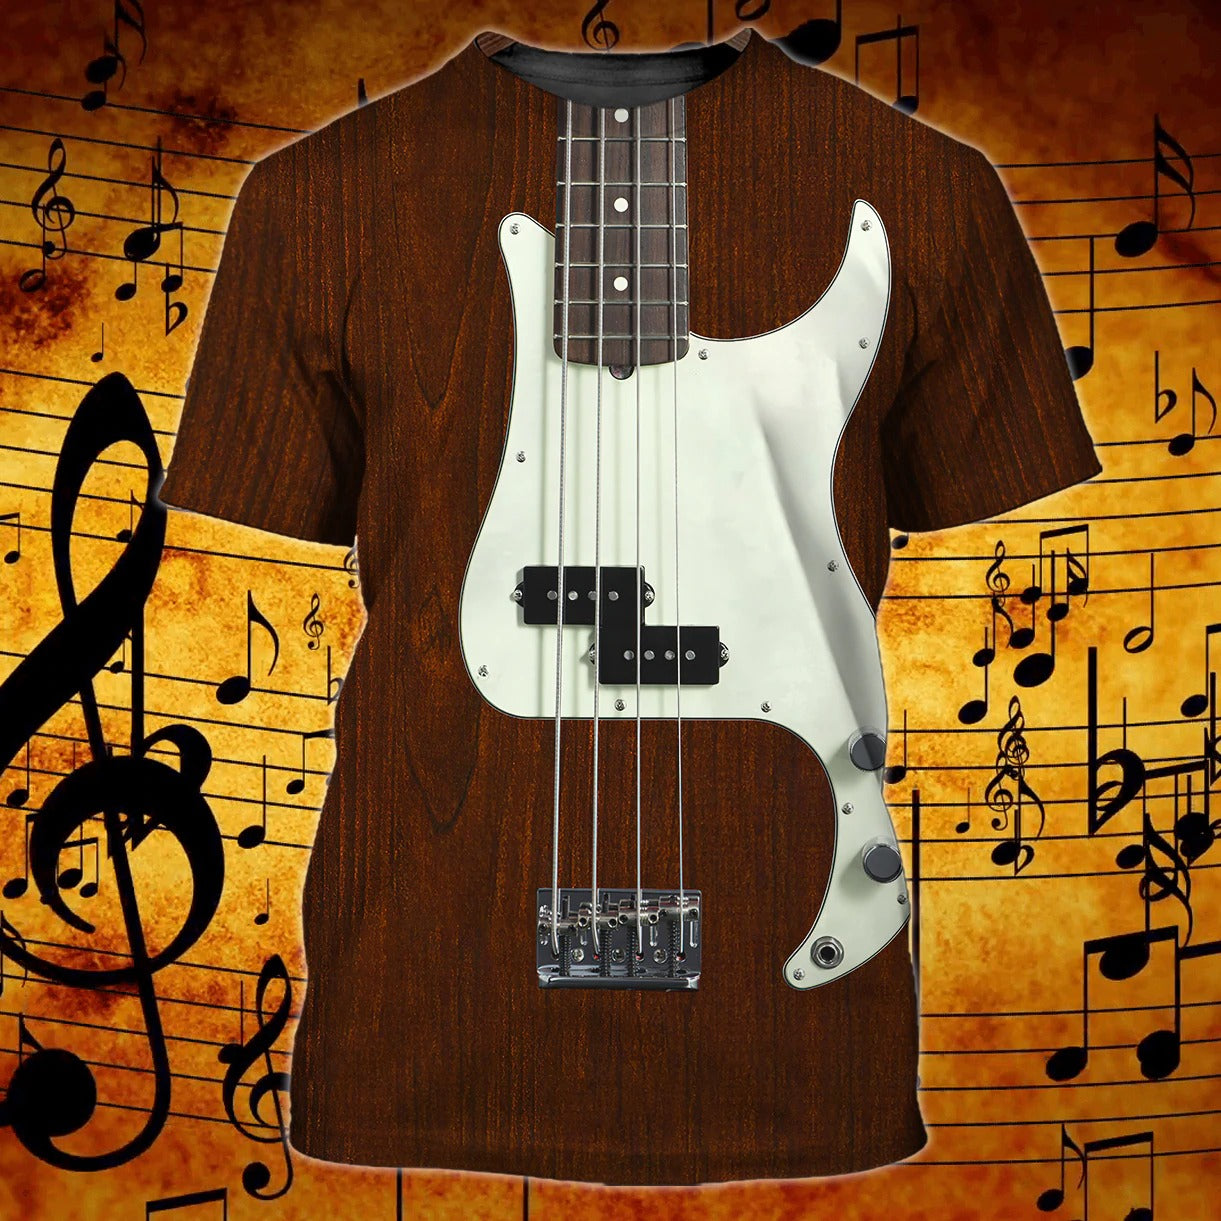 Bass Guitar 3D All Over Printing T Shirt For Guitar Lover/ Best Quality Sublimation Shirts For Bass Guitar Men